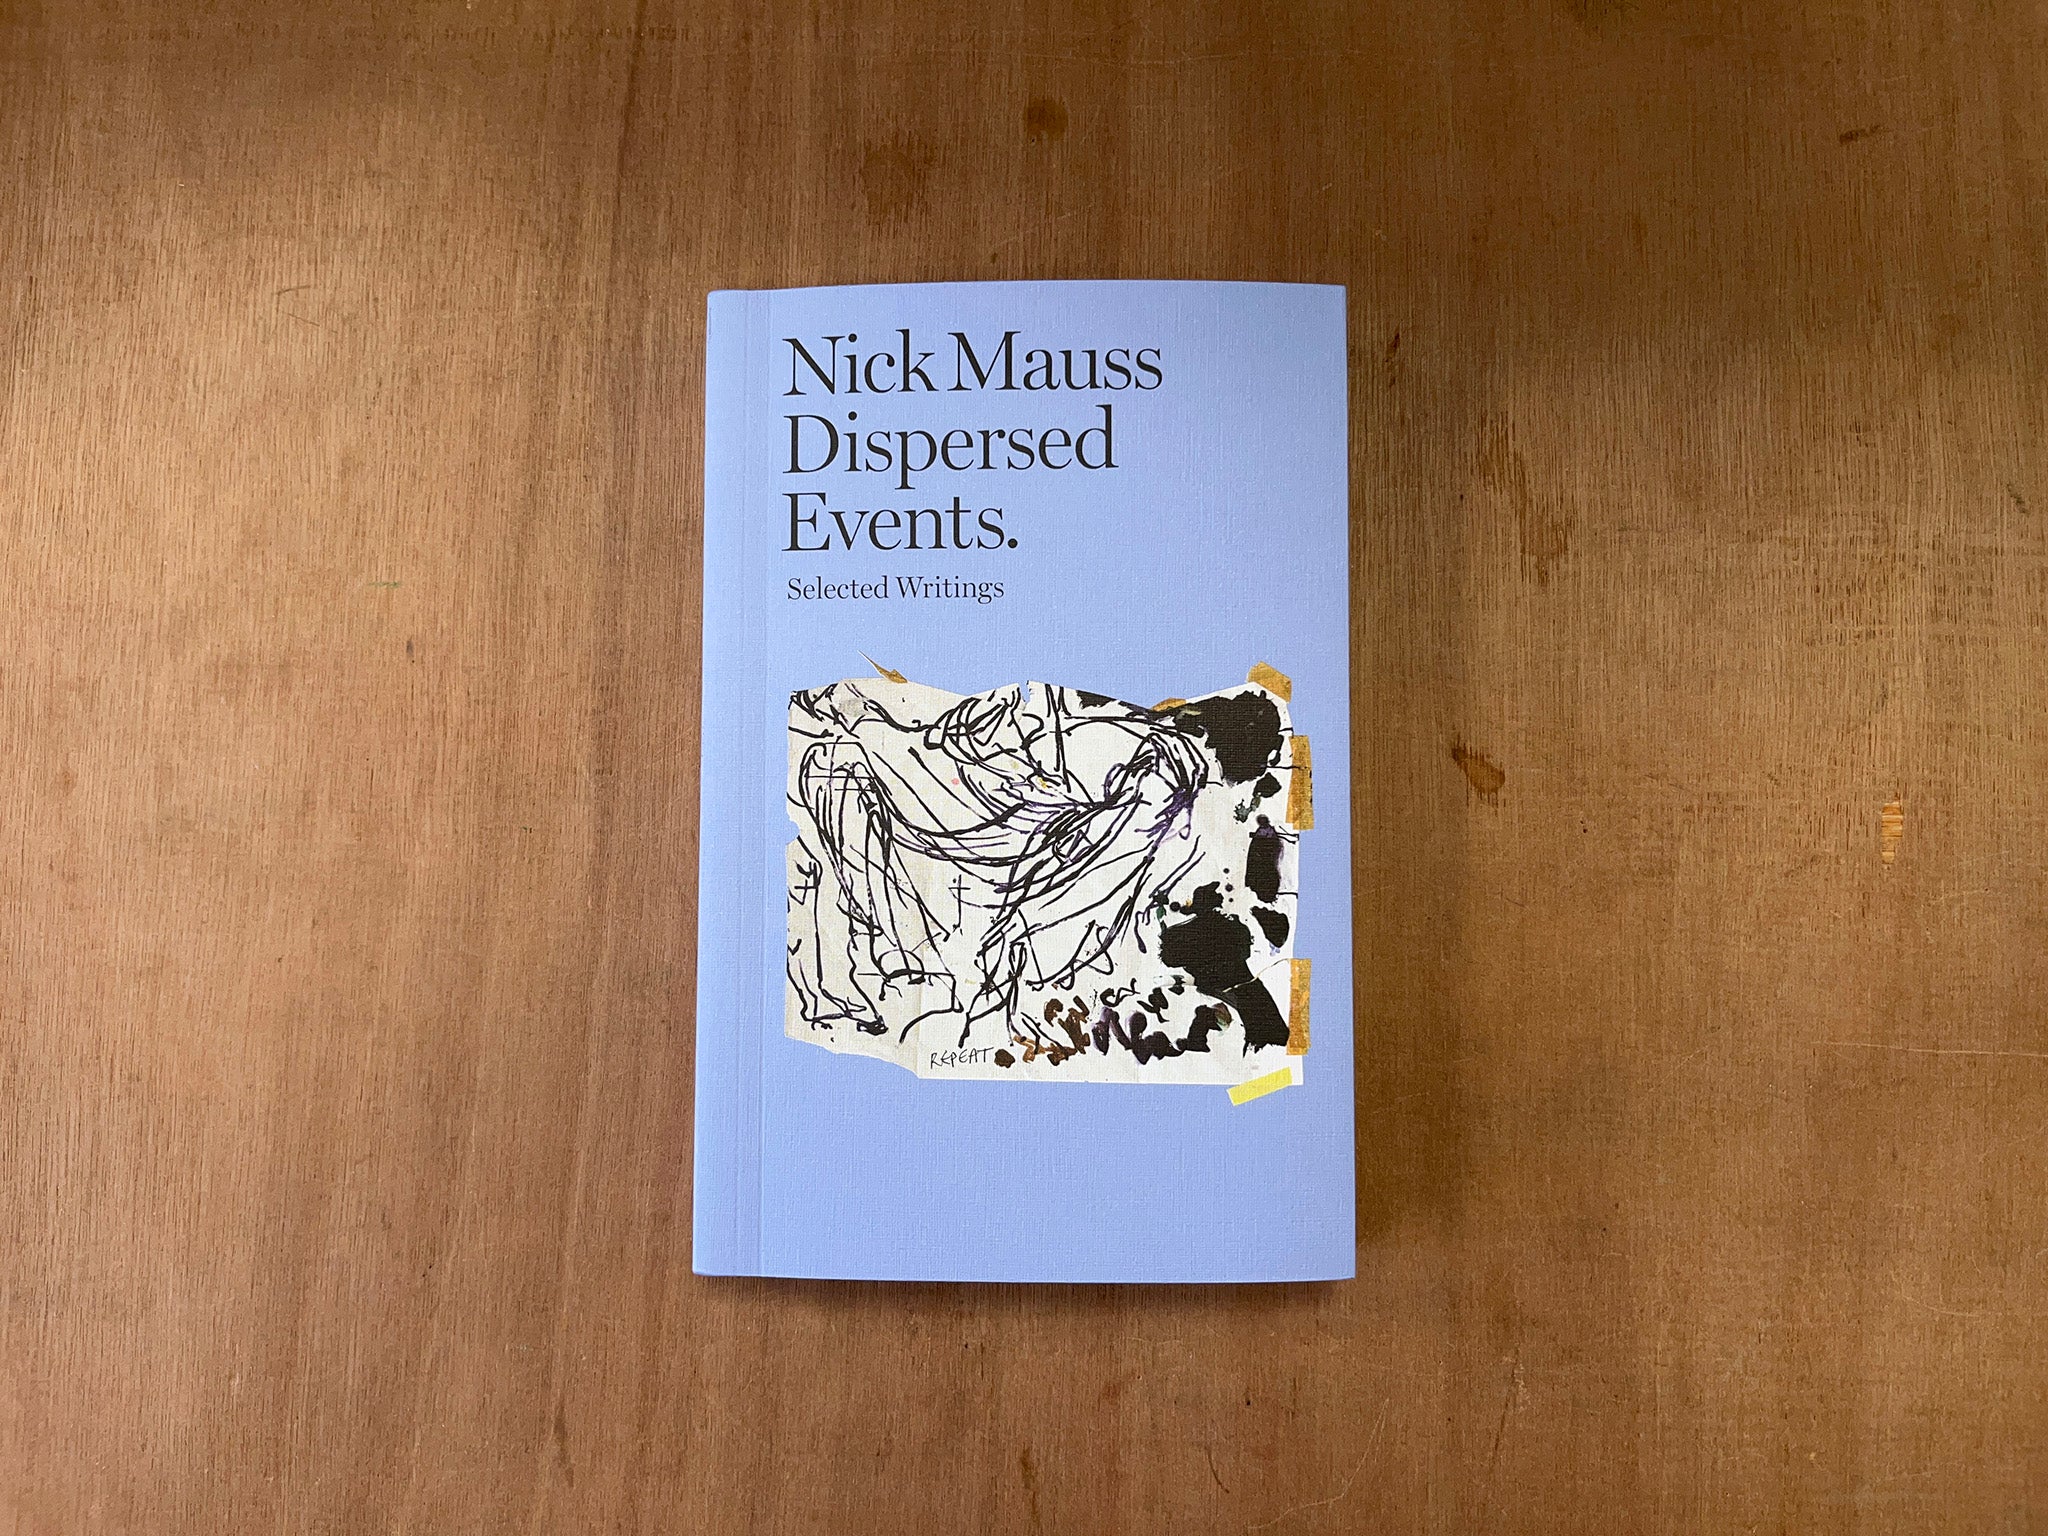 DISPERSED EVENTS. SELECTED WRITINGS by Nick Mauss